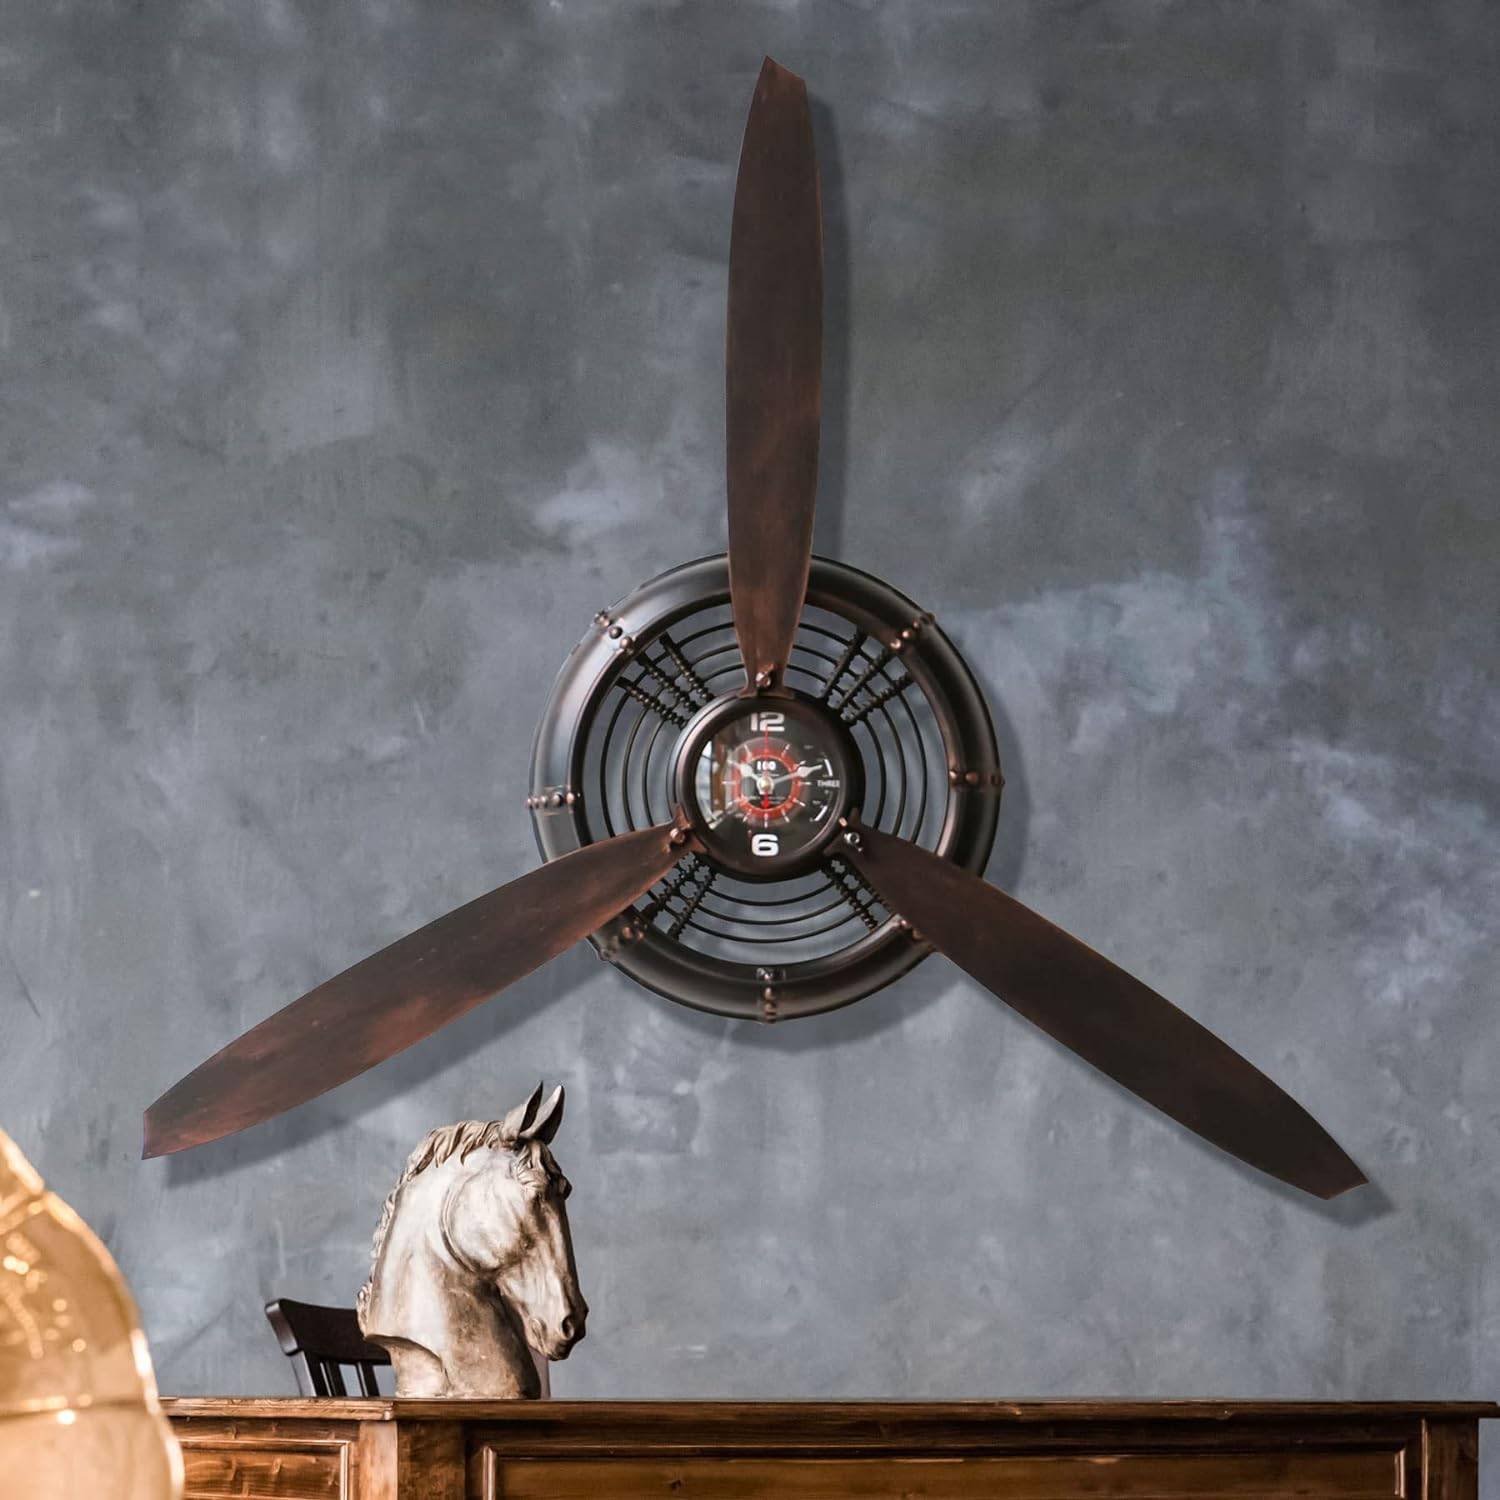 An airplane propeller used as art in living room.